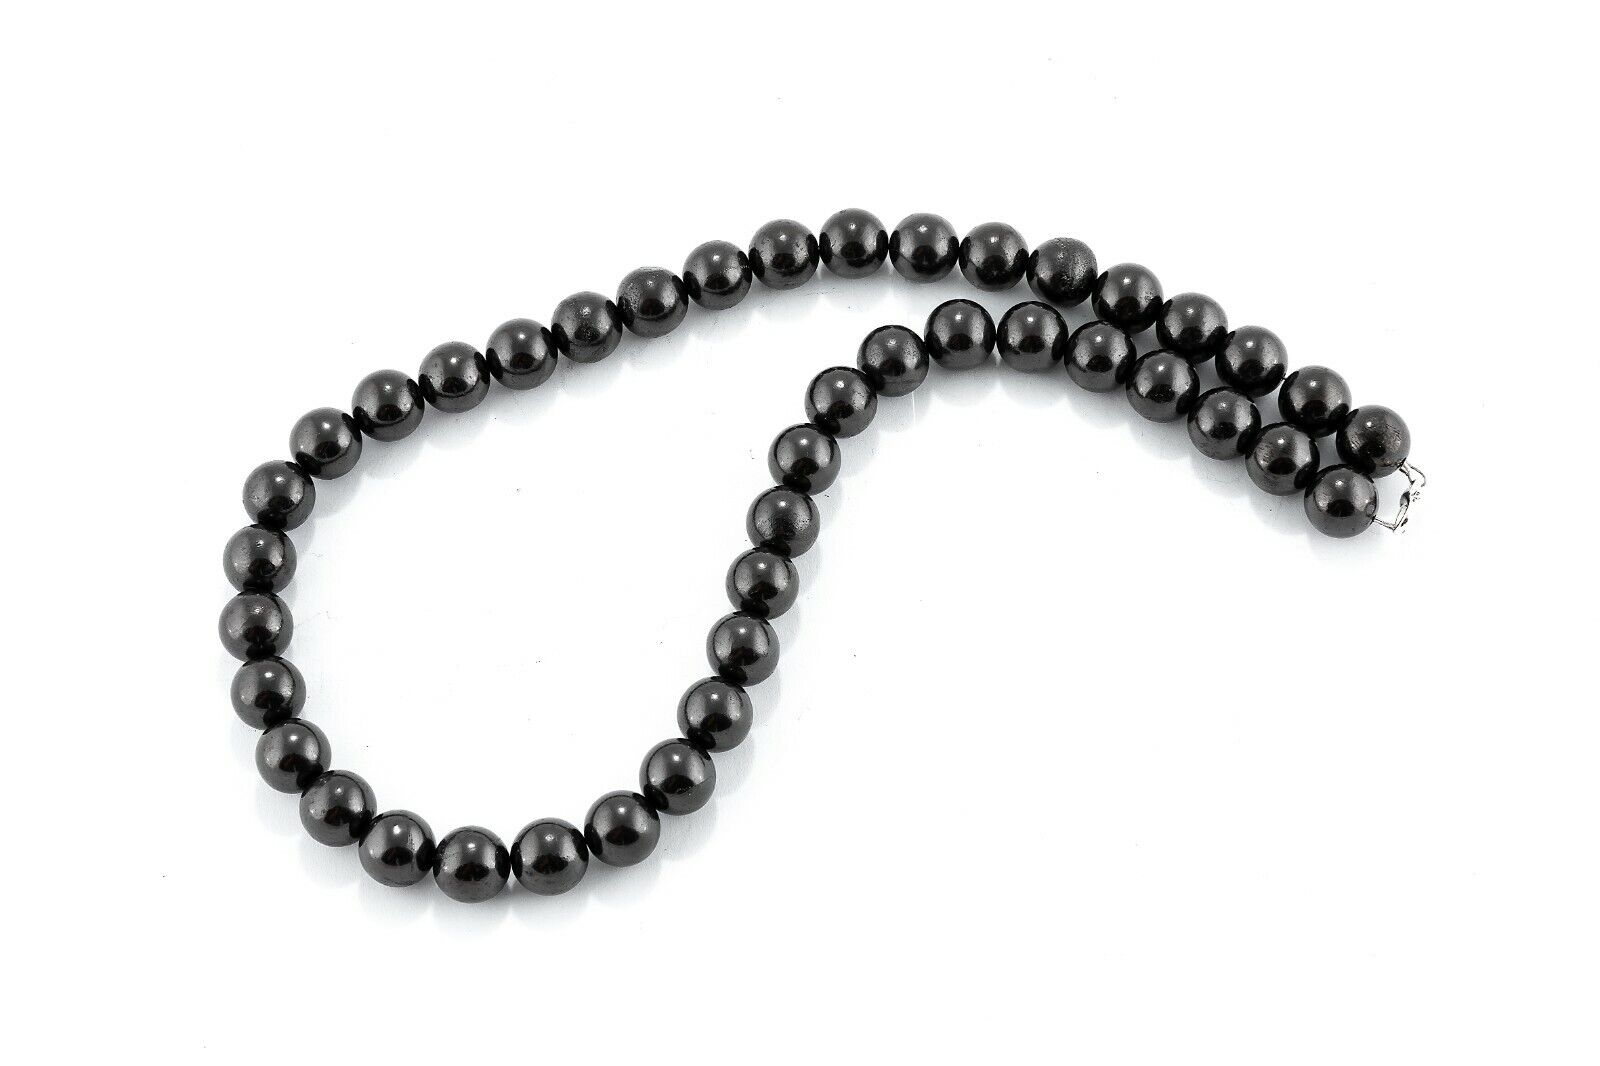 Shungite Necklace Night 12 mm beads rare mineral EMF protection 19inch